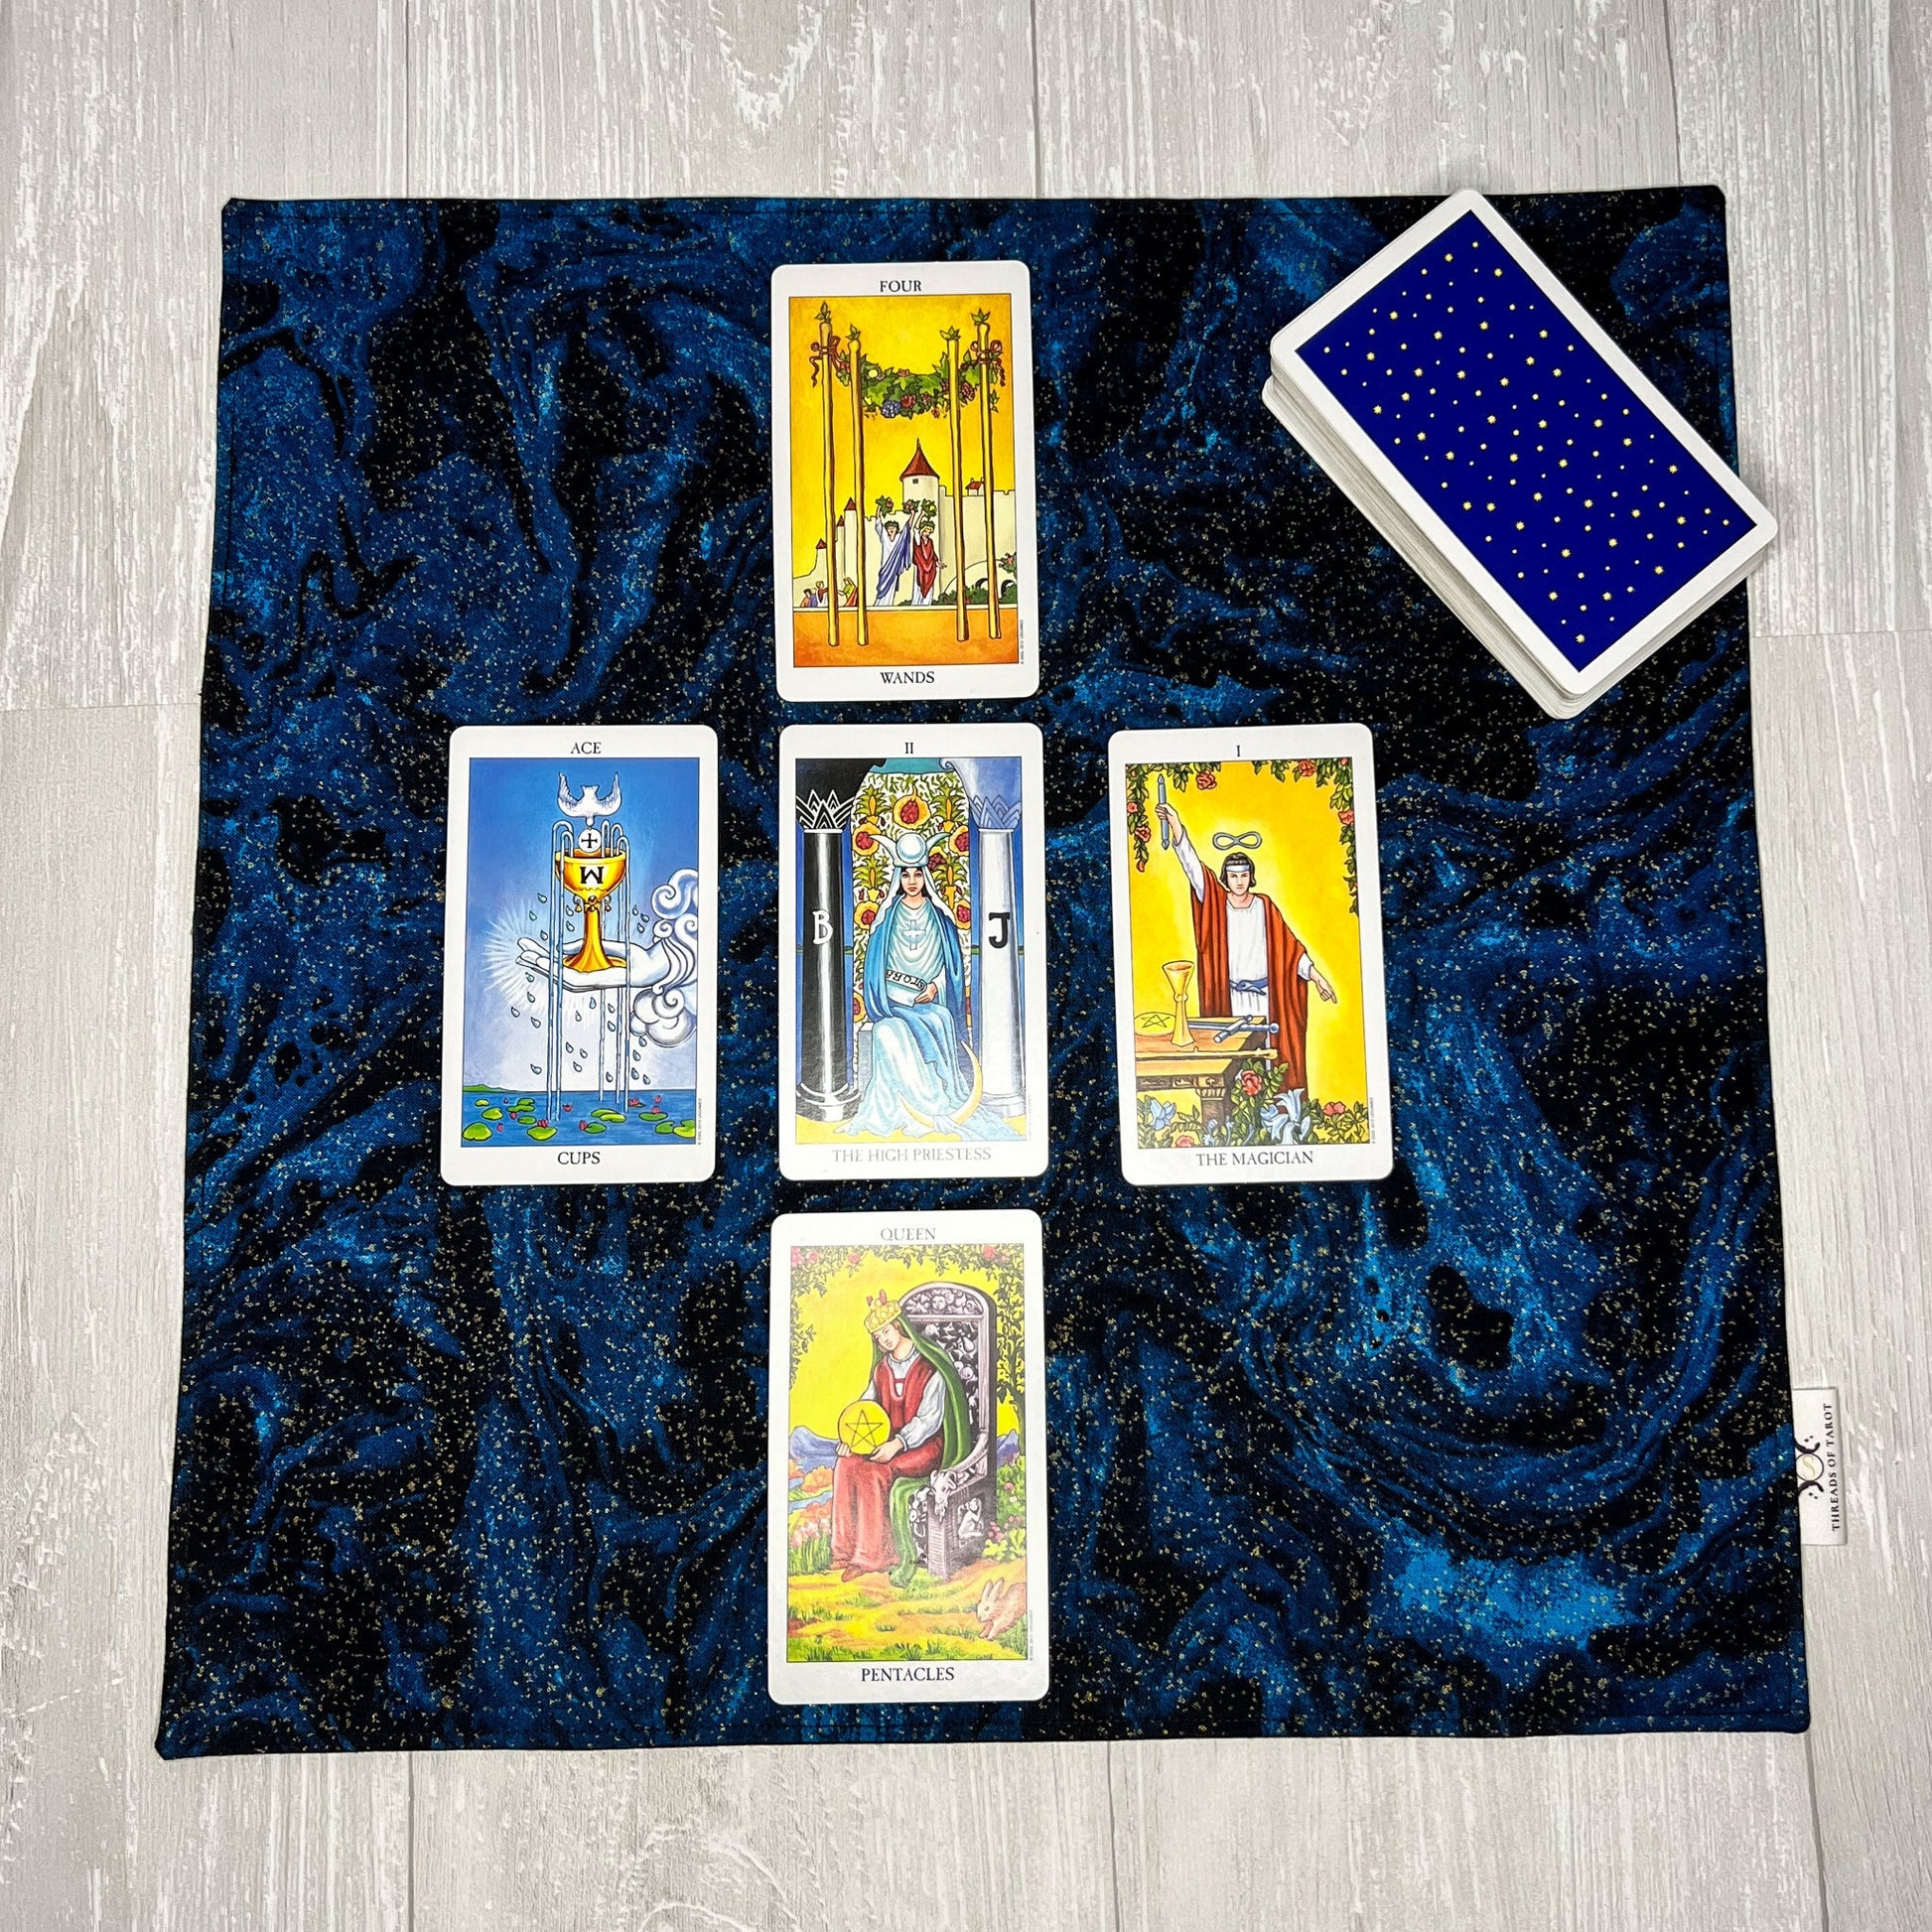 Blue Galactic Altar Cloth, Tarot Ritual Cloth, Rune Casting, Tarot Reading Supplies, Pagan Witchcraft Wiccan Gift Supplies, Divination Tools